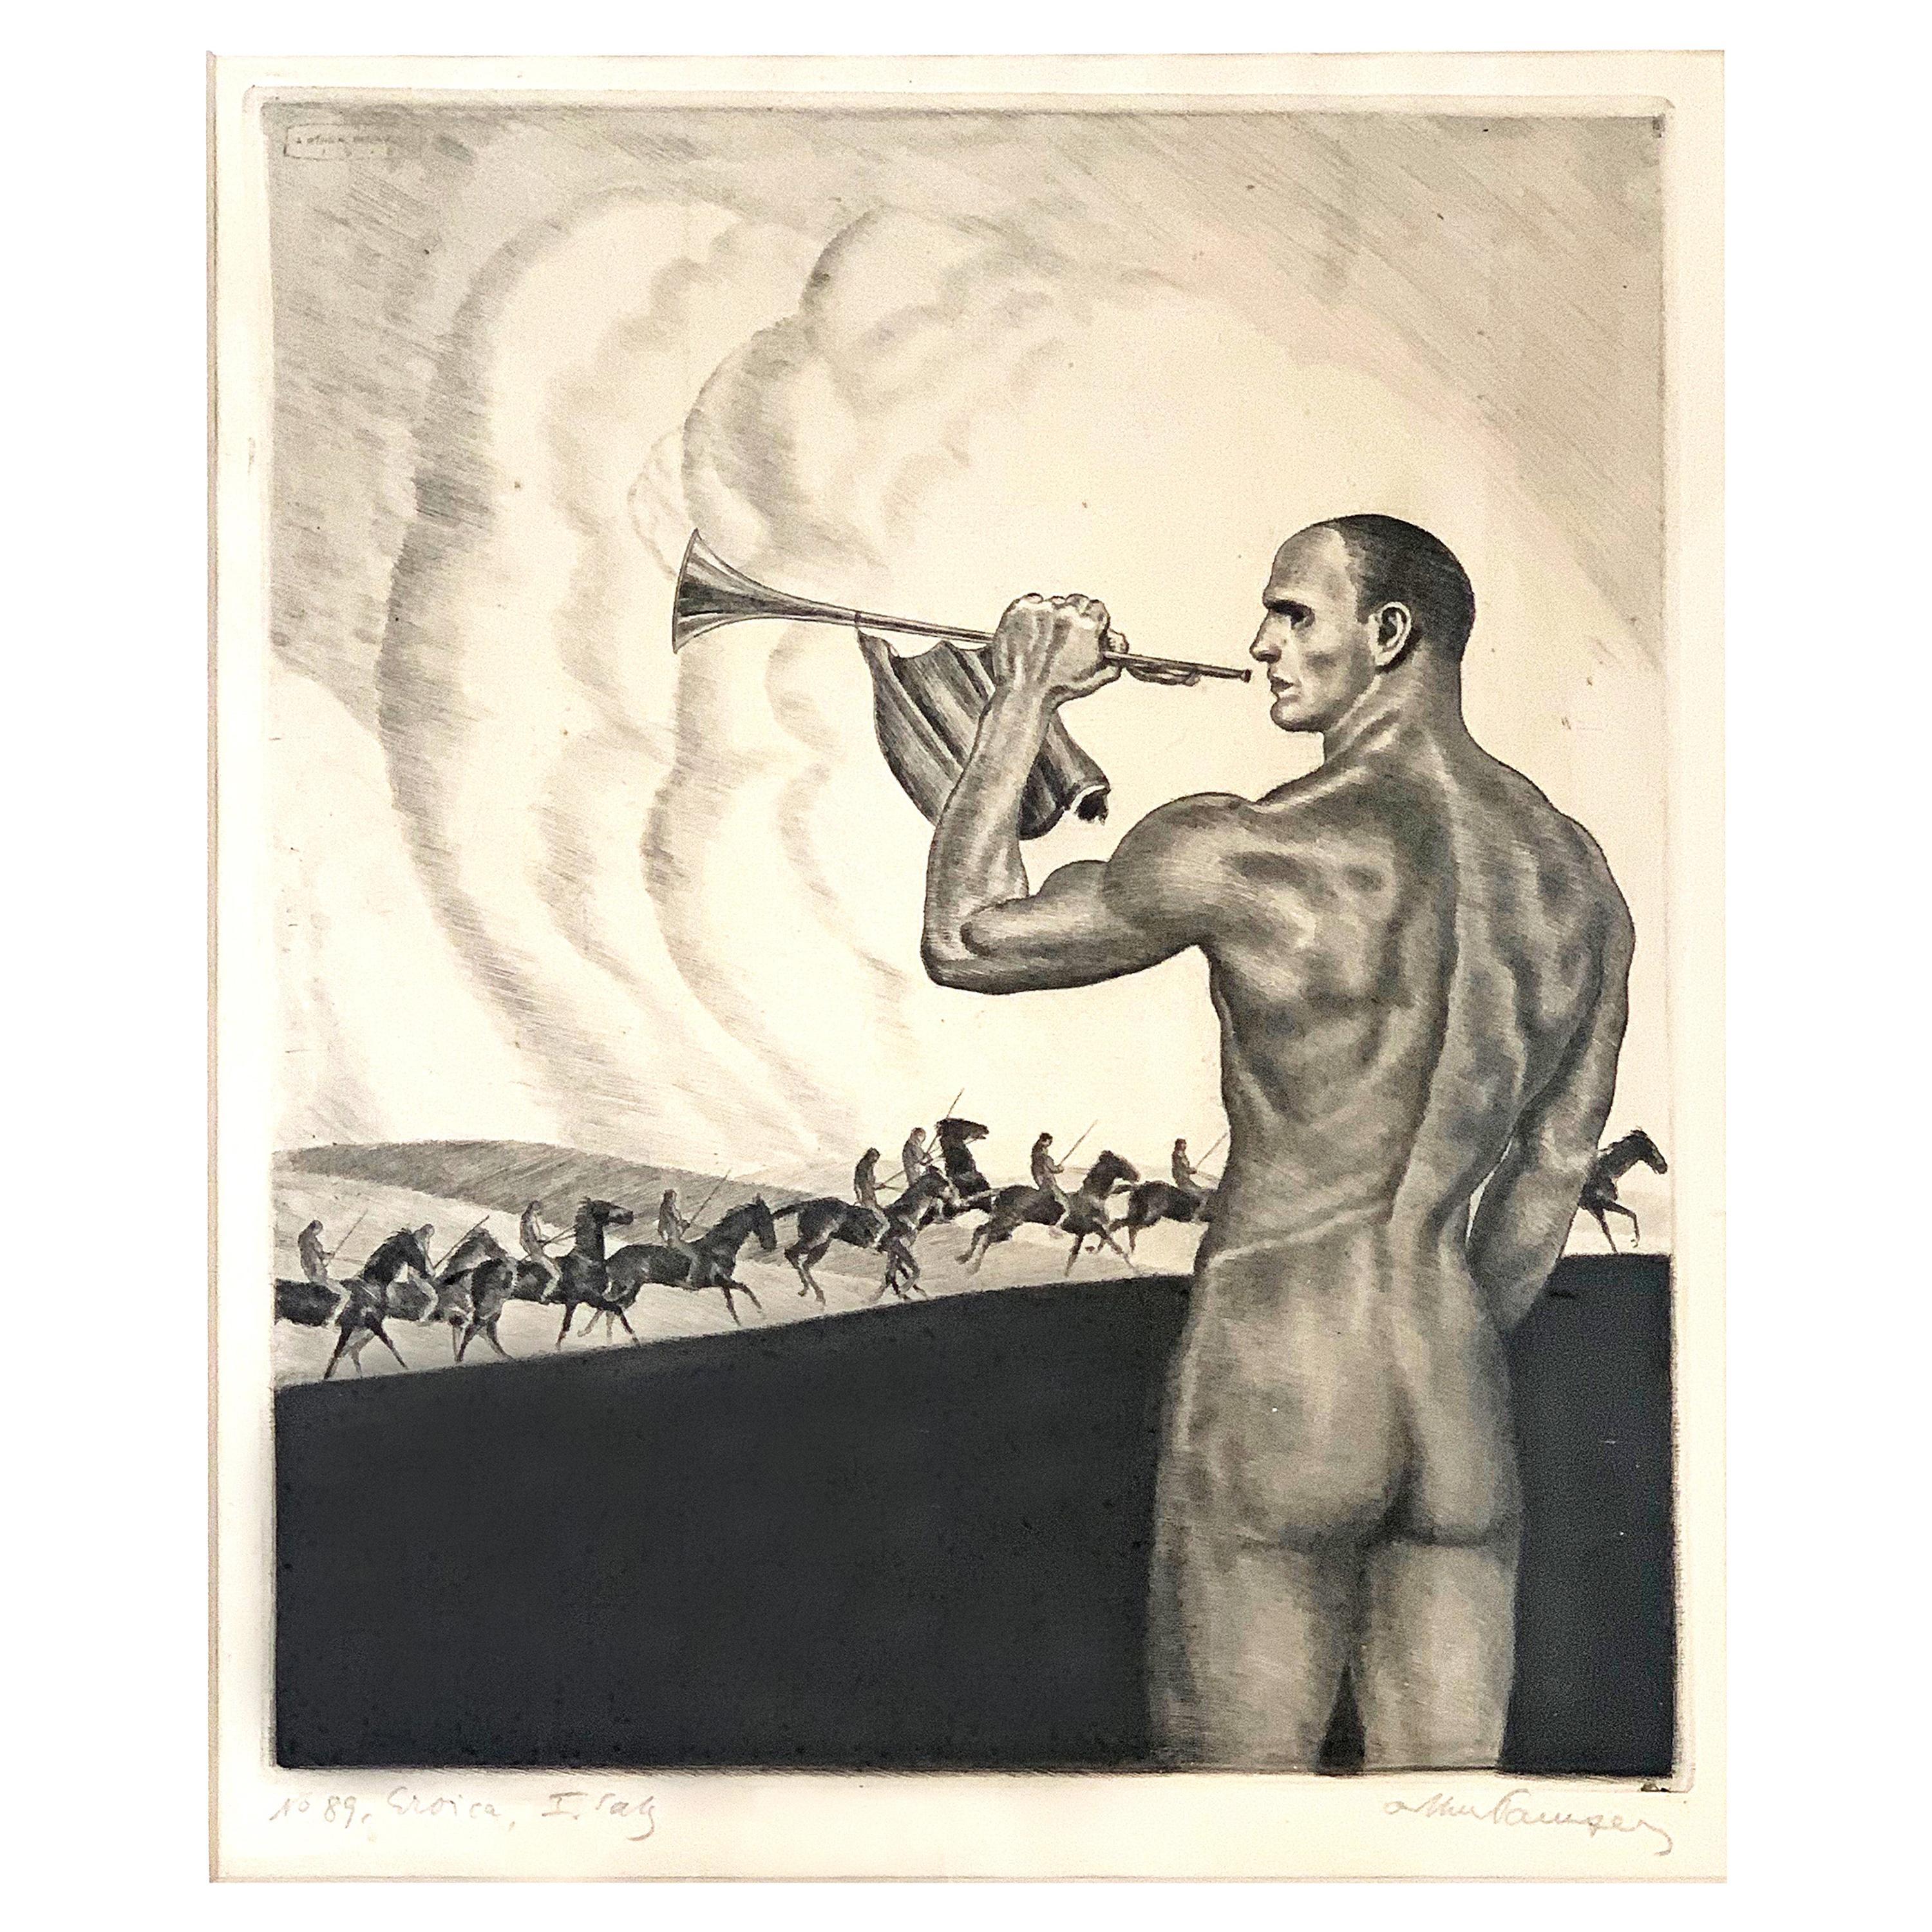 "Eroica, " Rare Print with Nude Male and Beethoven Reference, World War I Era